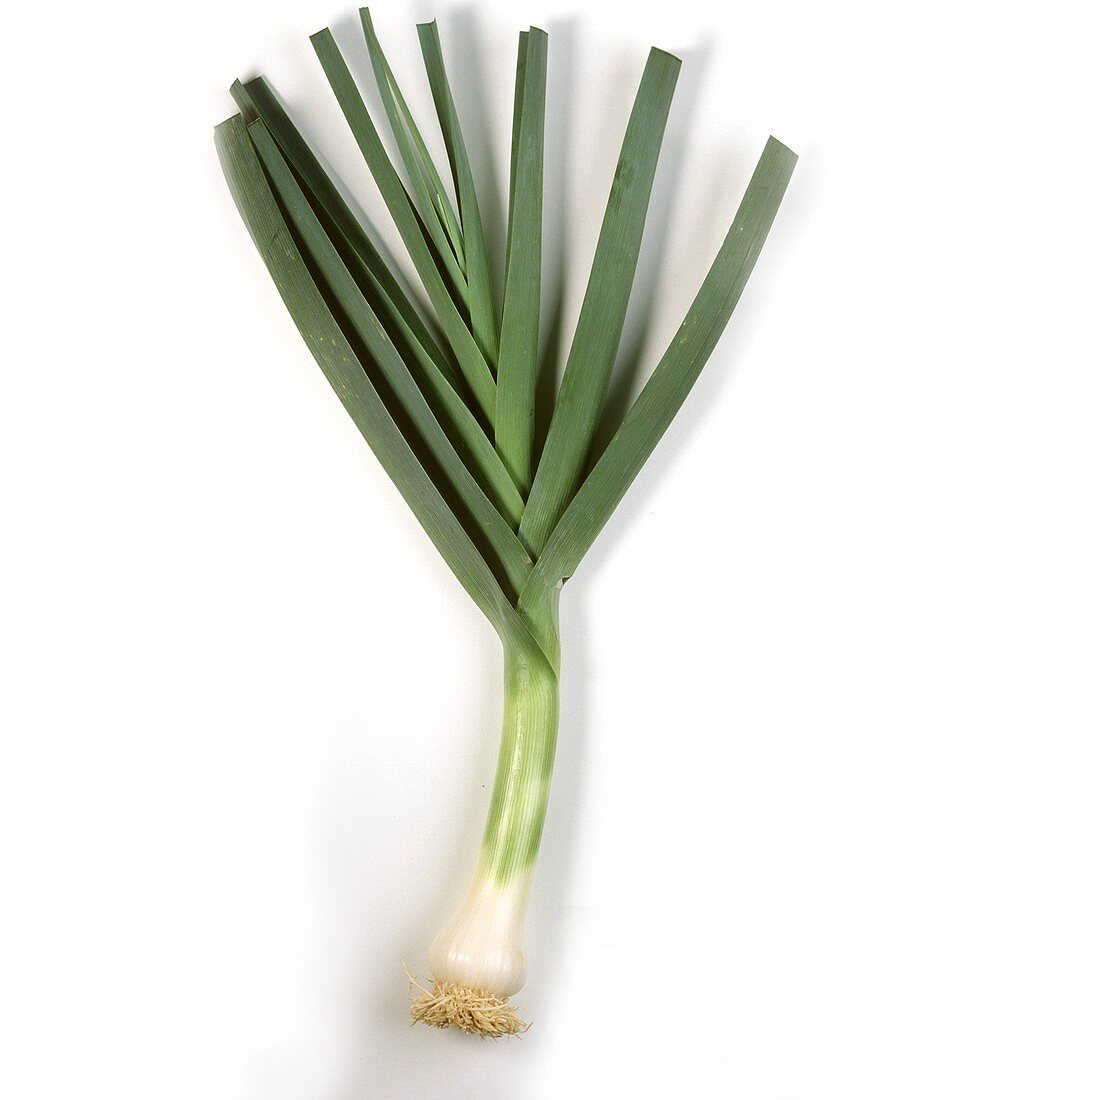 A leek with green leaves on white background